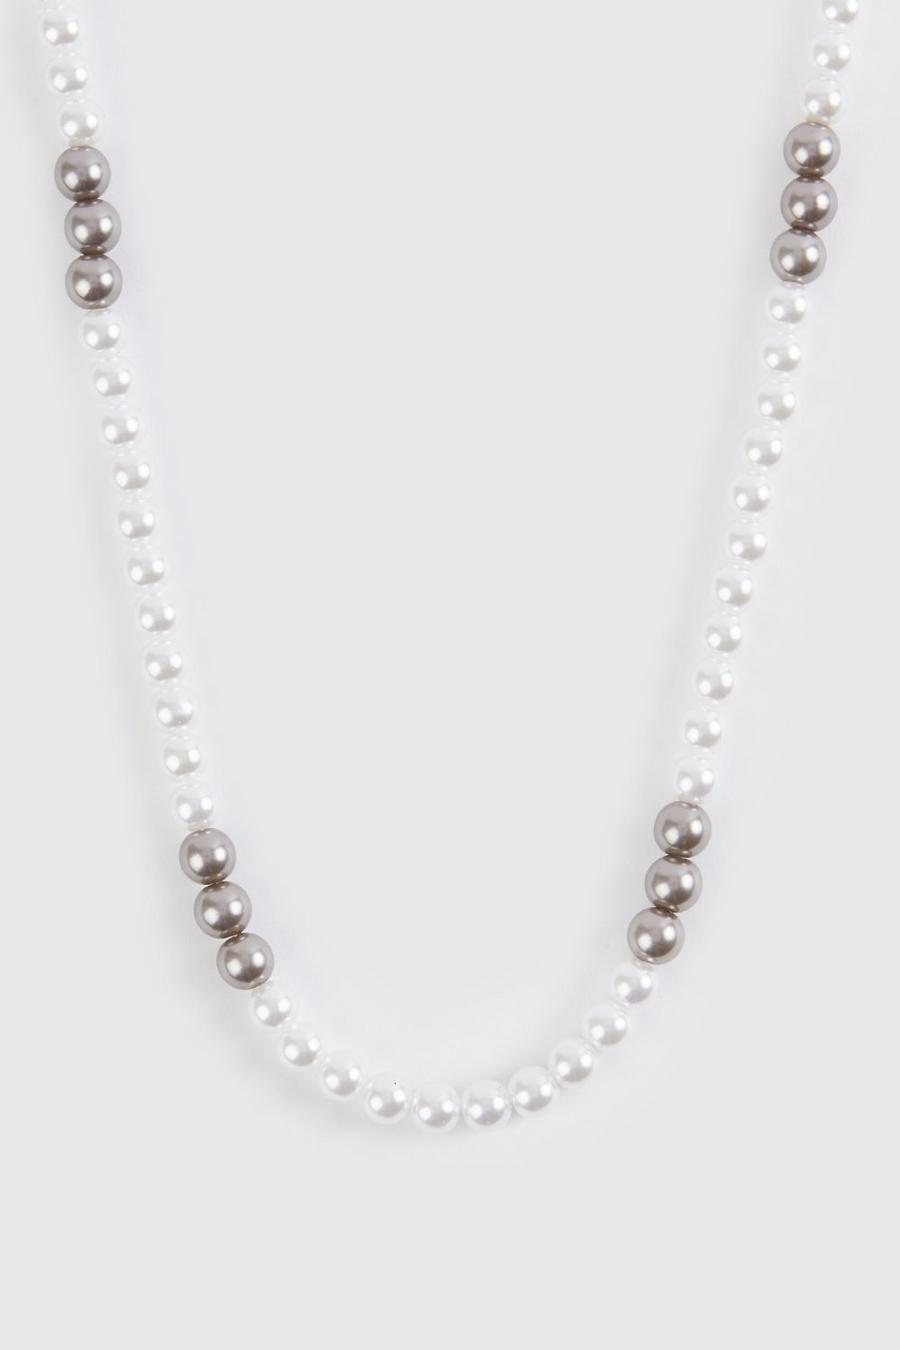 White weiß Contrast Pearl Necklace